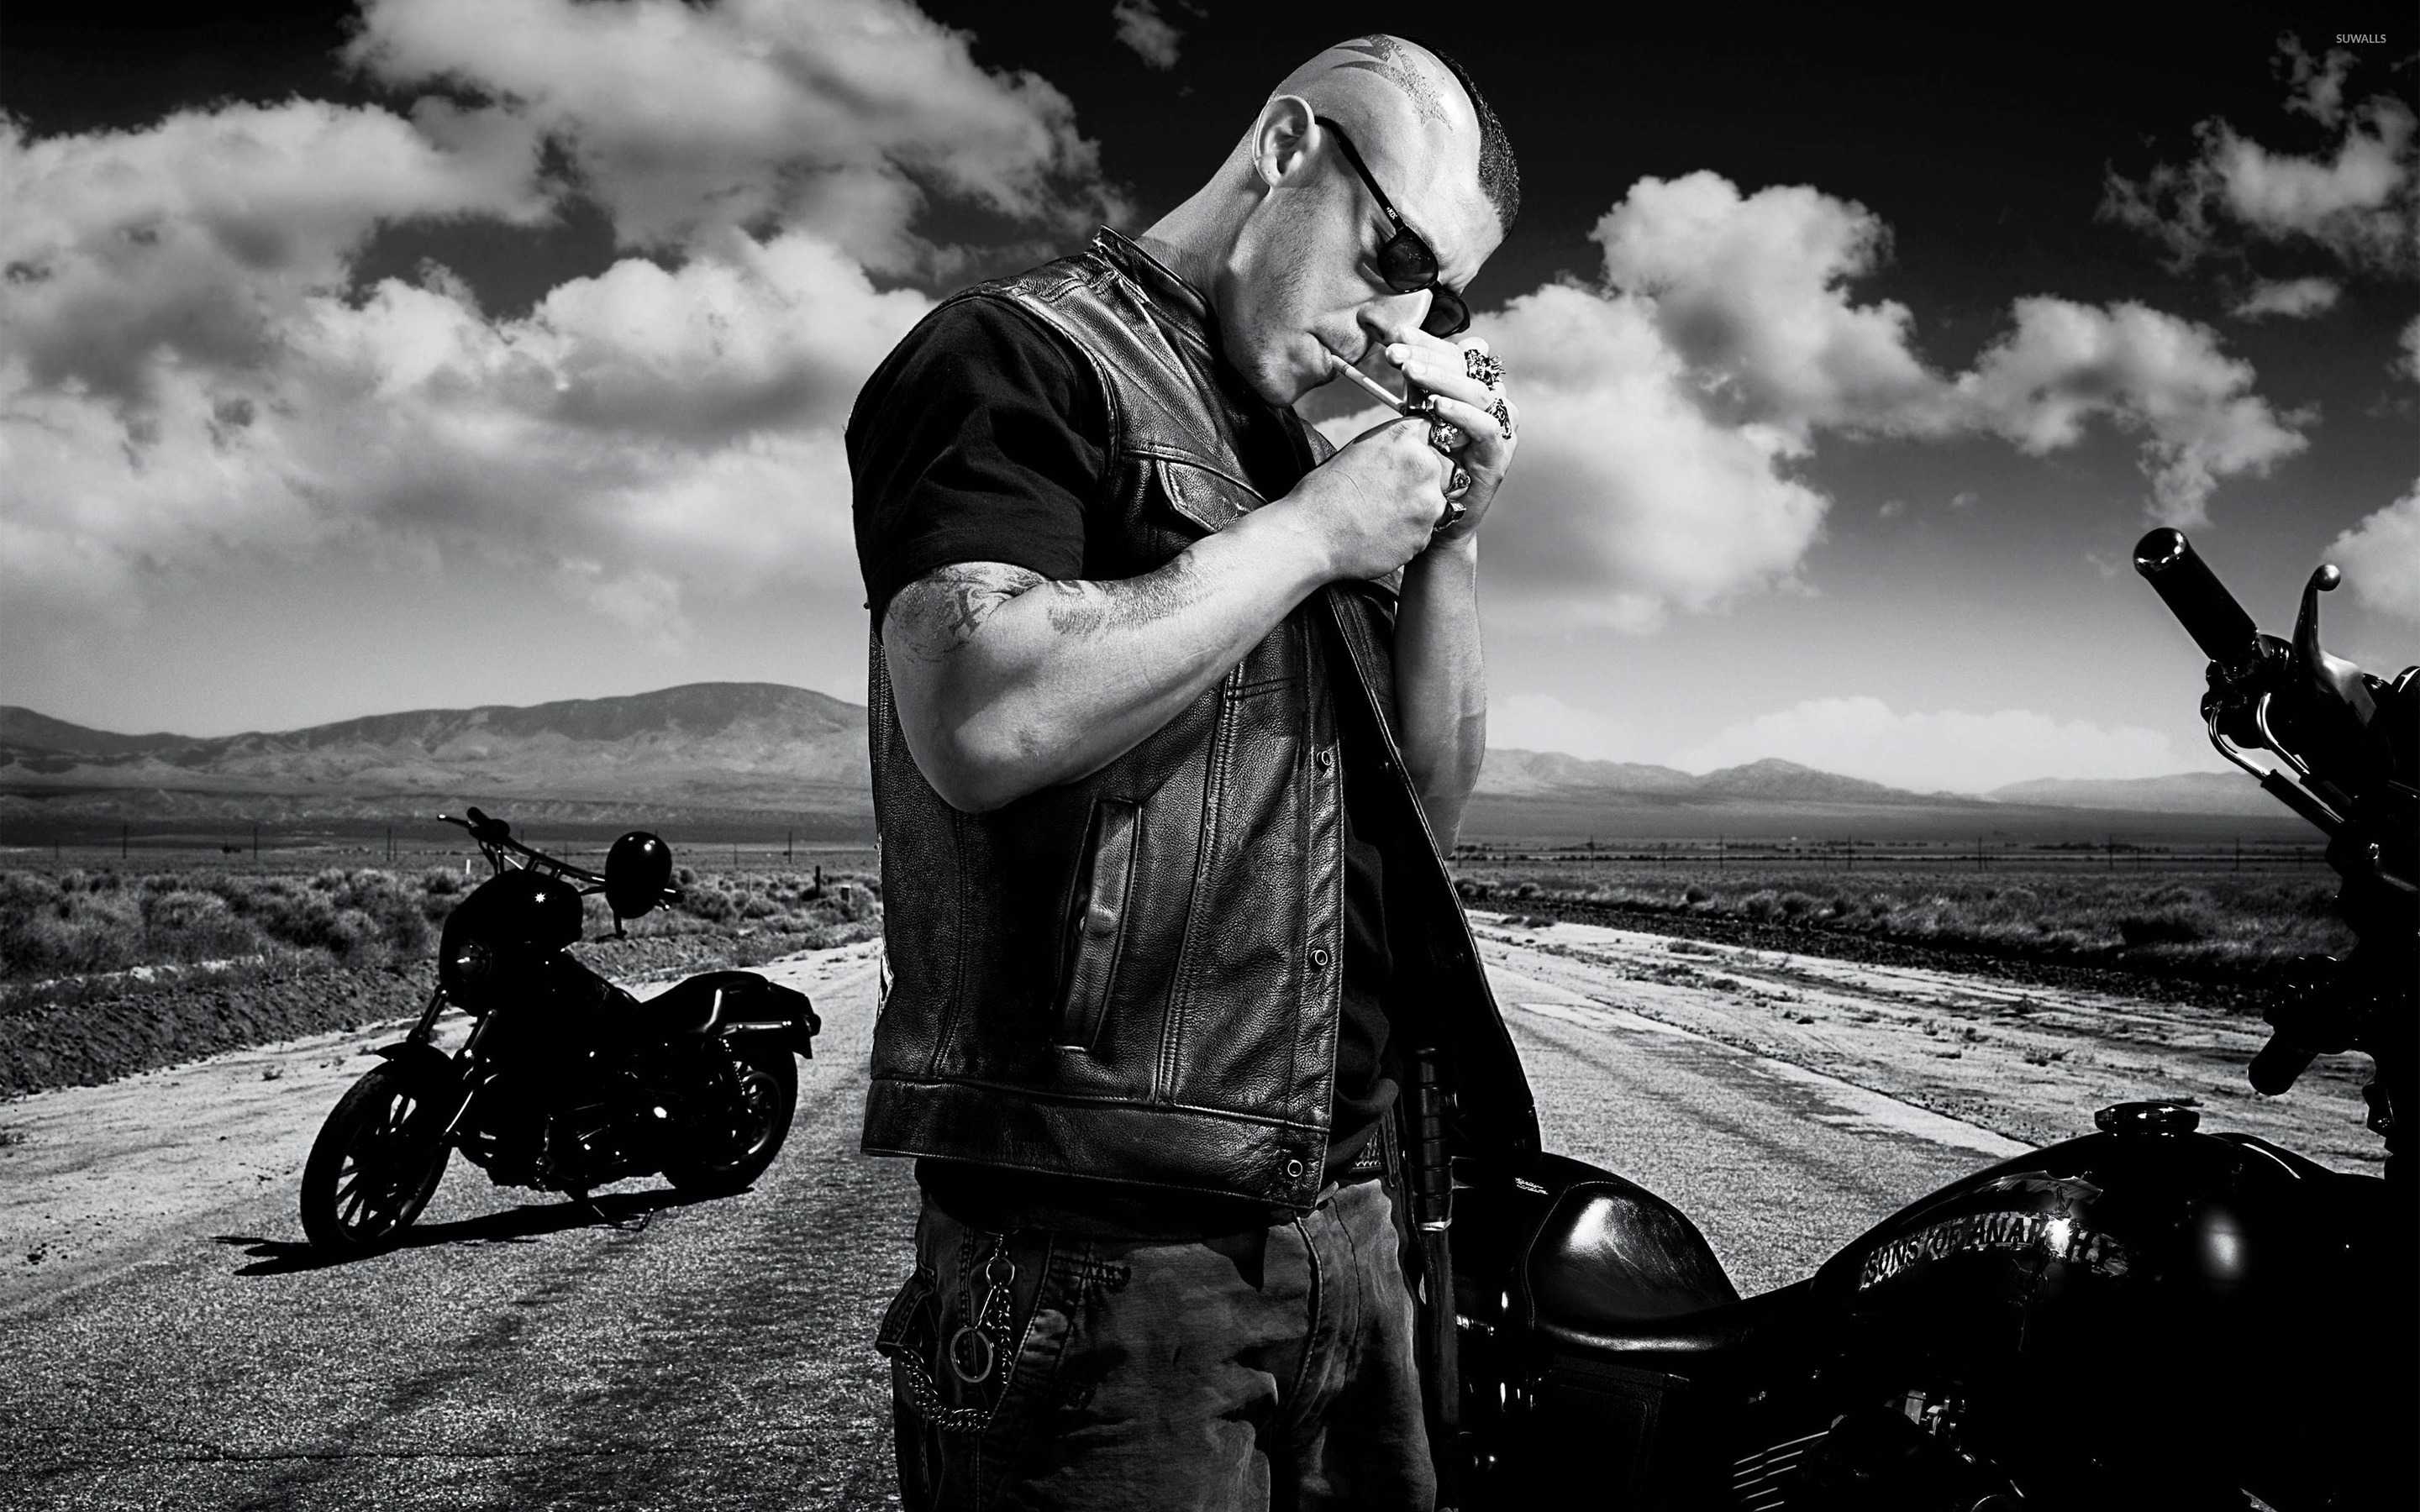 Sons Of Anarchy Jax Teller Wallpapers Wallpaper Cave